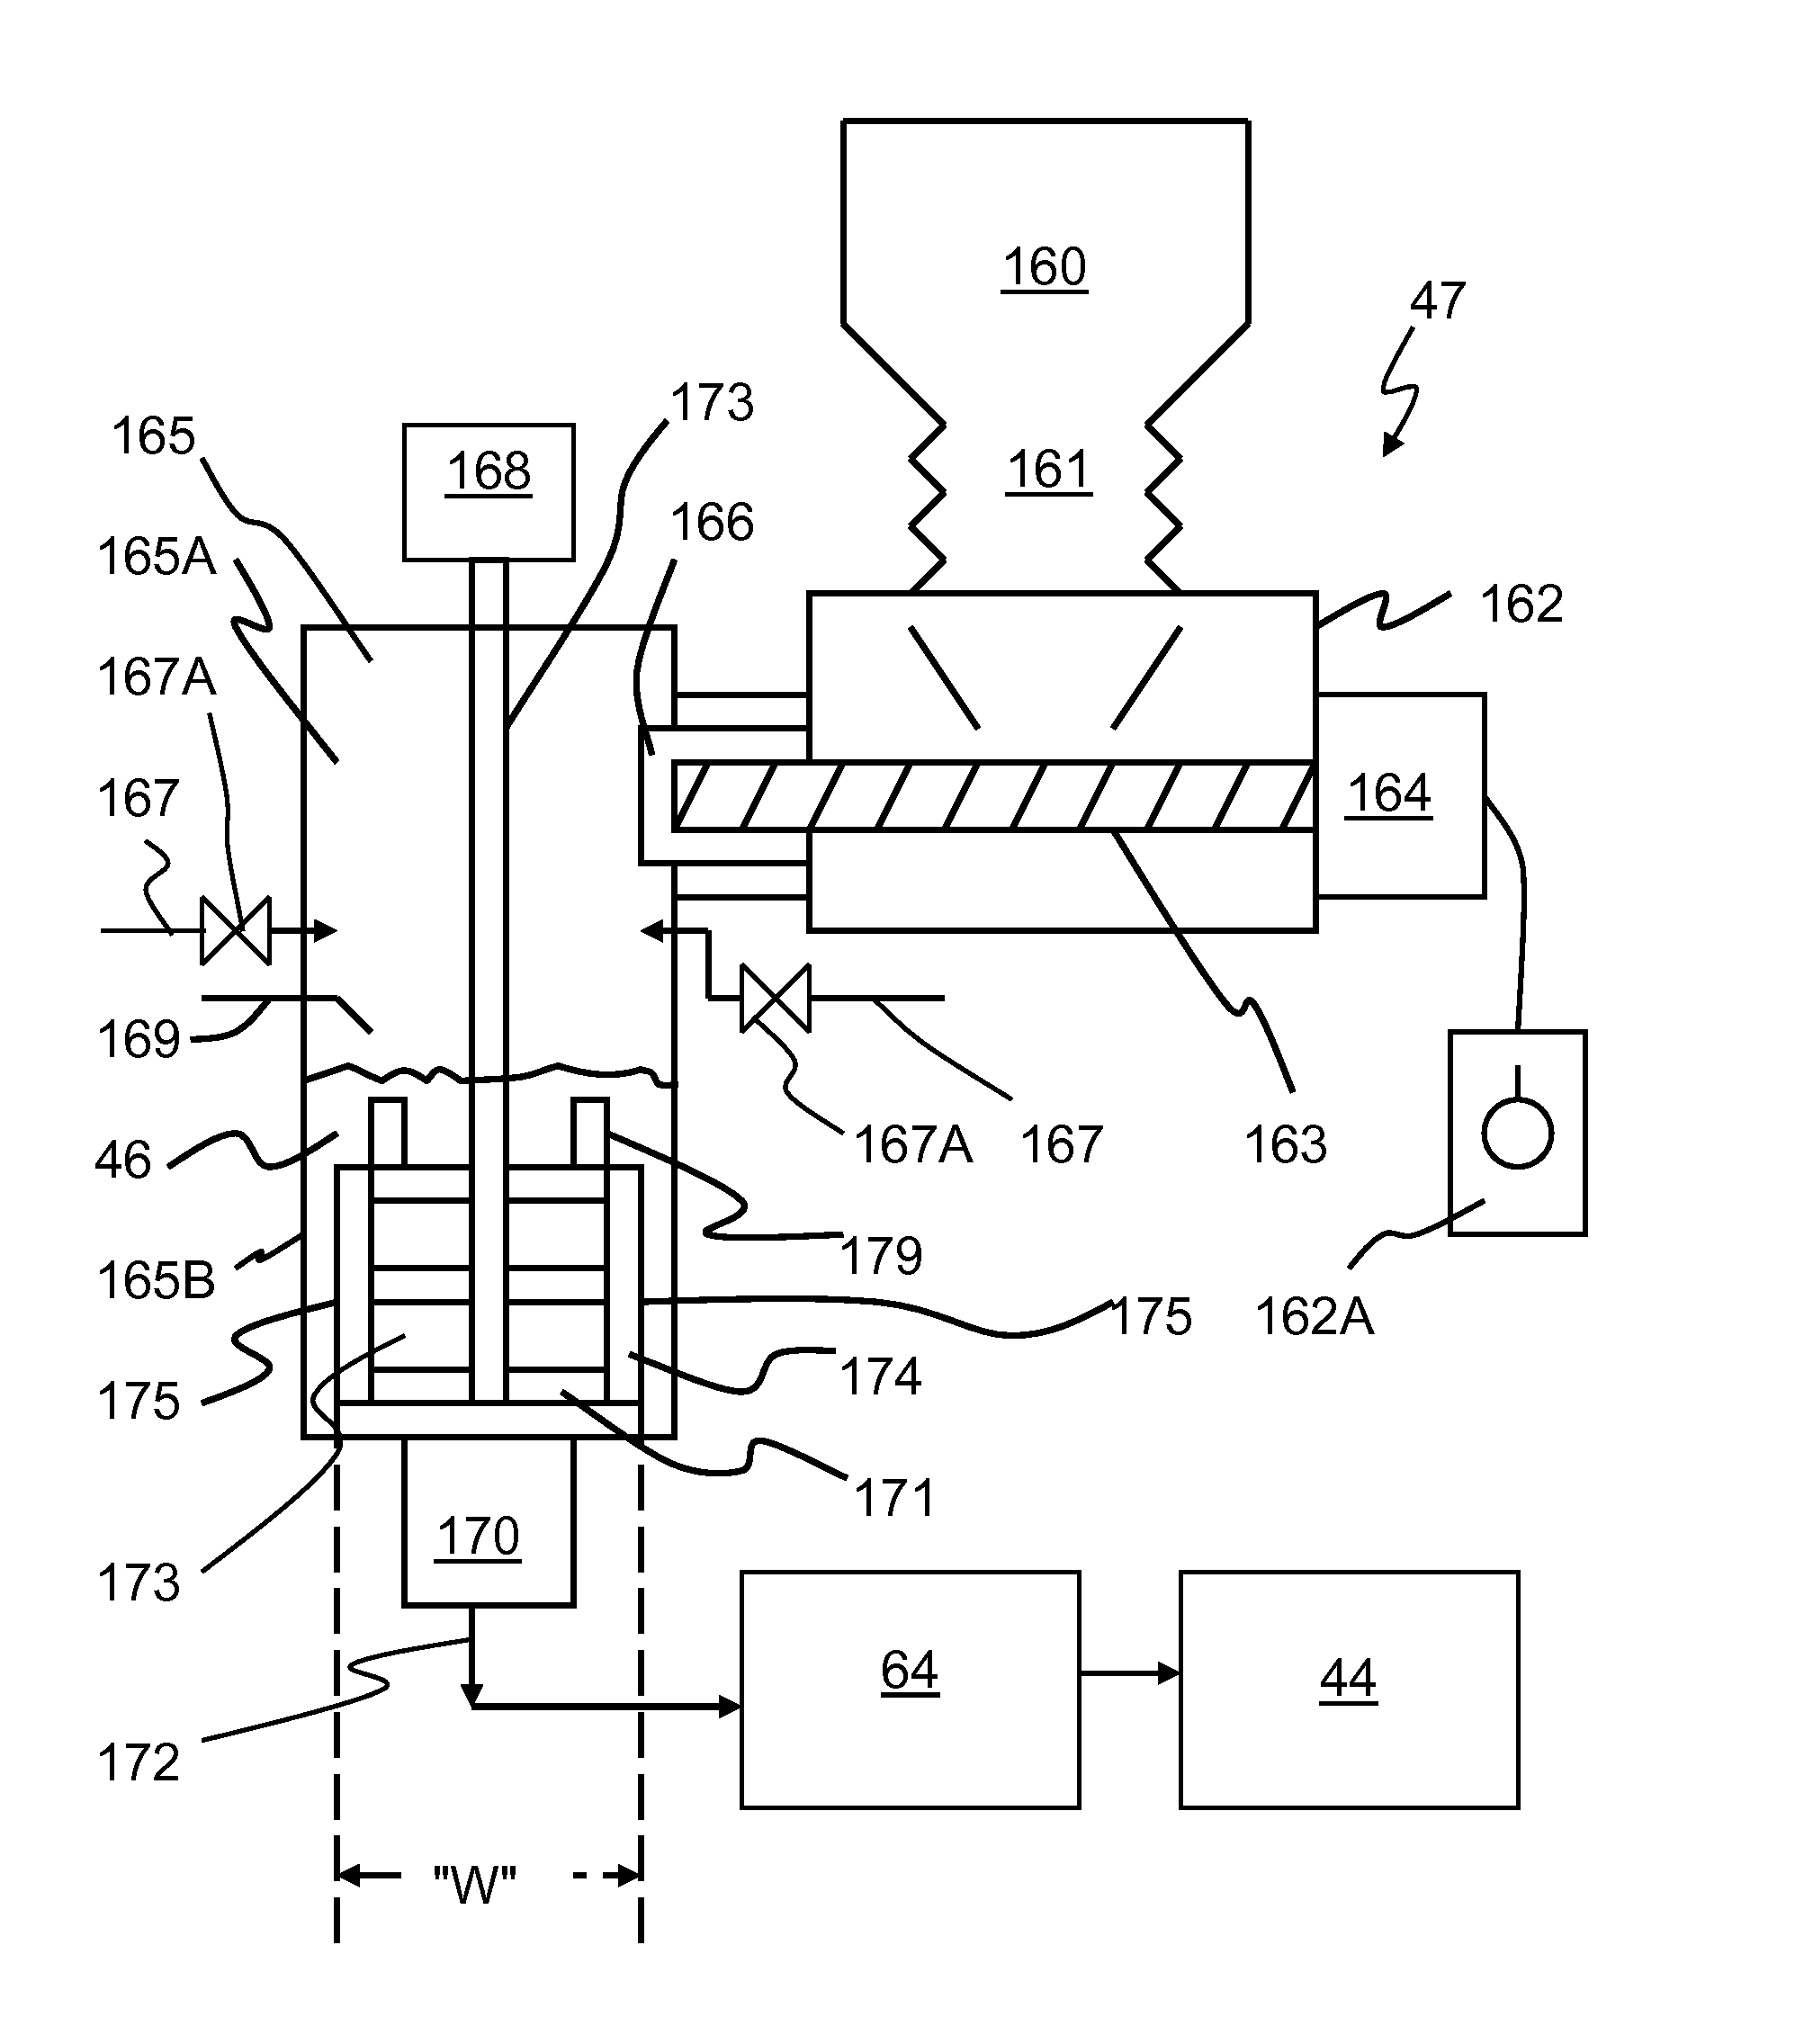 Apparatus and method for wet mixing cementitious slurry for fiber-reinforced structural cement panels